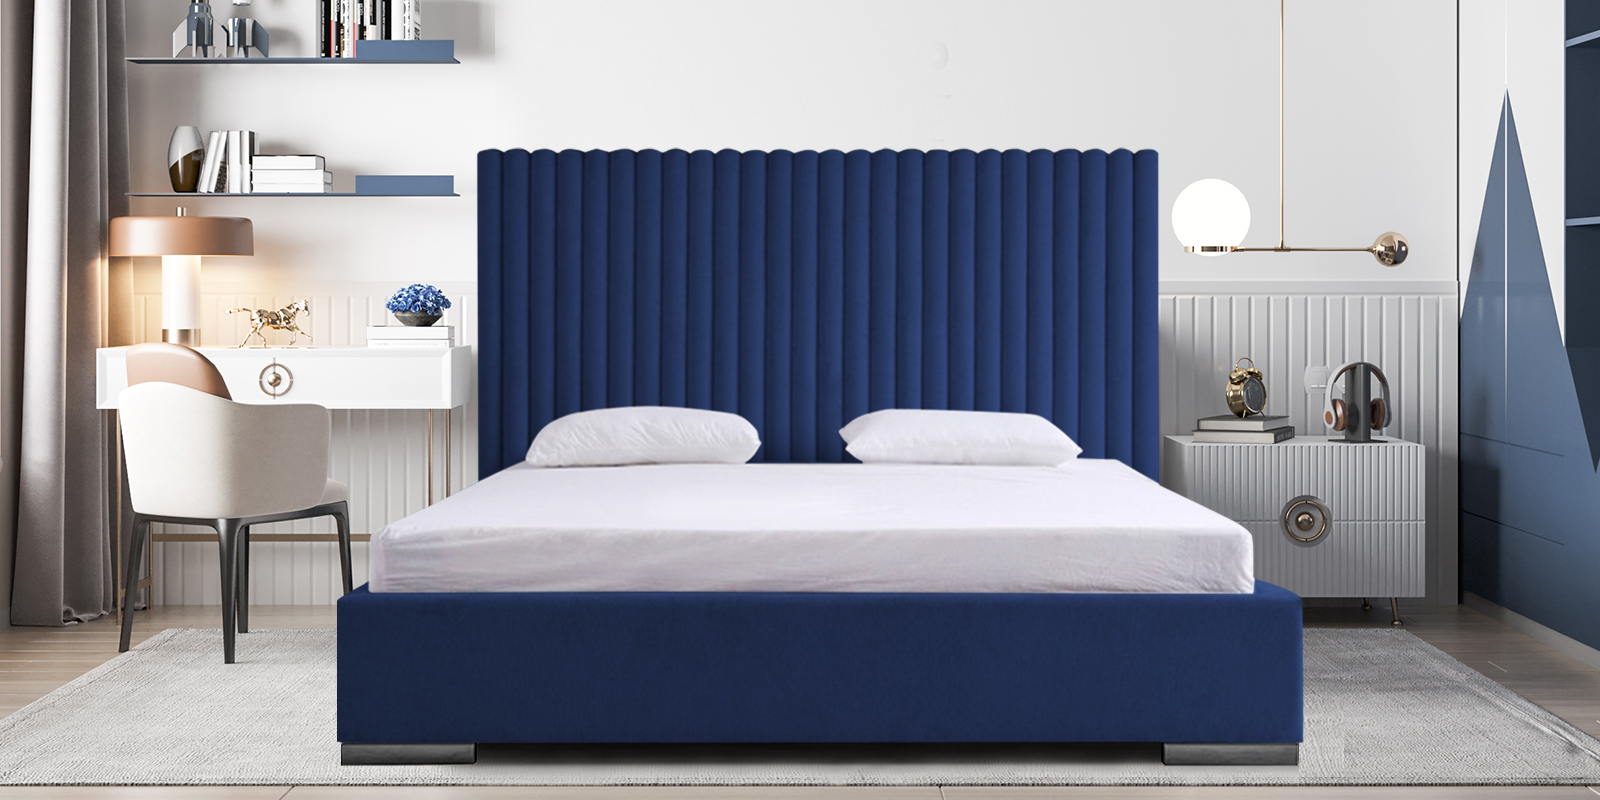 Harmonious King Size Bed In Navy Blue Colour - Dreamzz Furniture ...